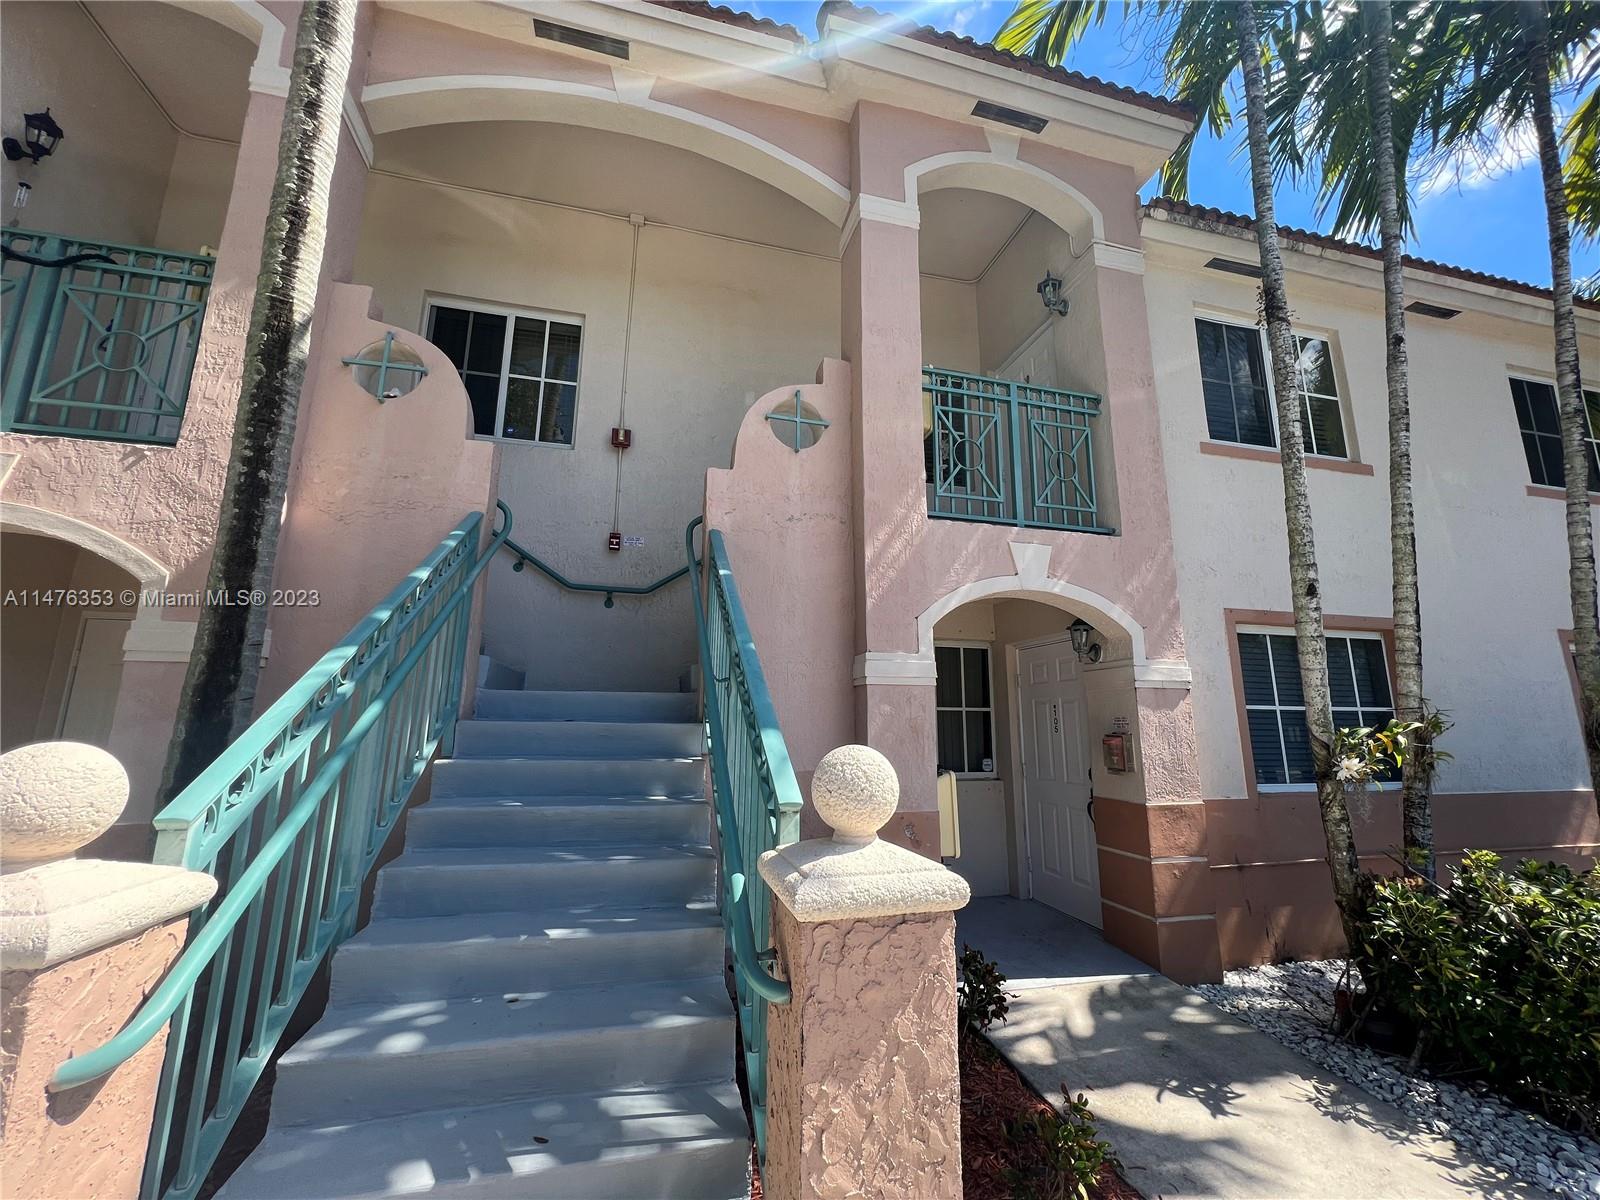 2125 NW 77th Way 205, Pembroke Pines, Florida 33024, 2 Bedrooms Bedrooms, ,2 BathroomsBathrooms,Residentiallease,For Rent,2125 NW 77th Way 205,A11476353